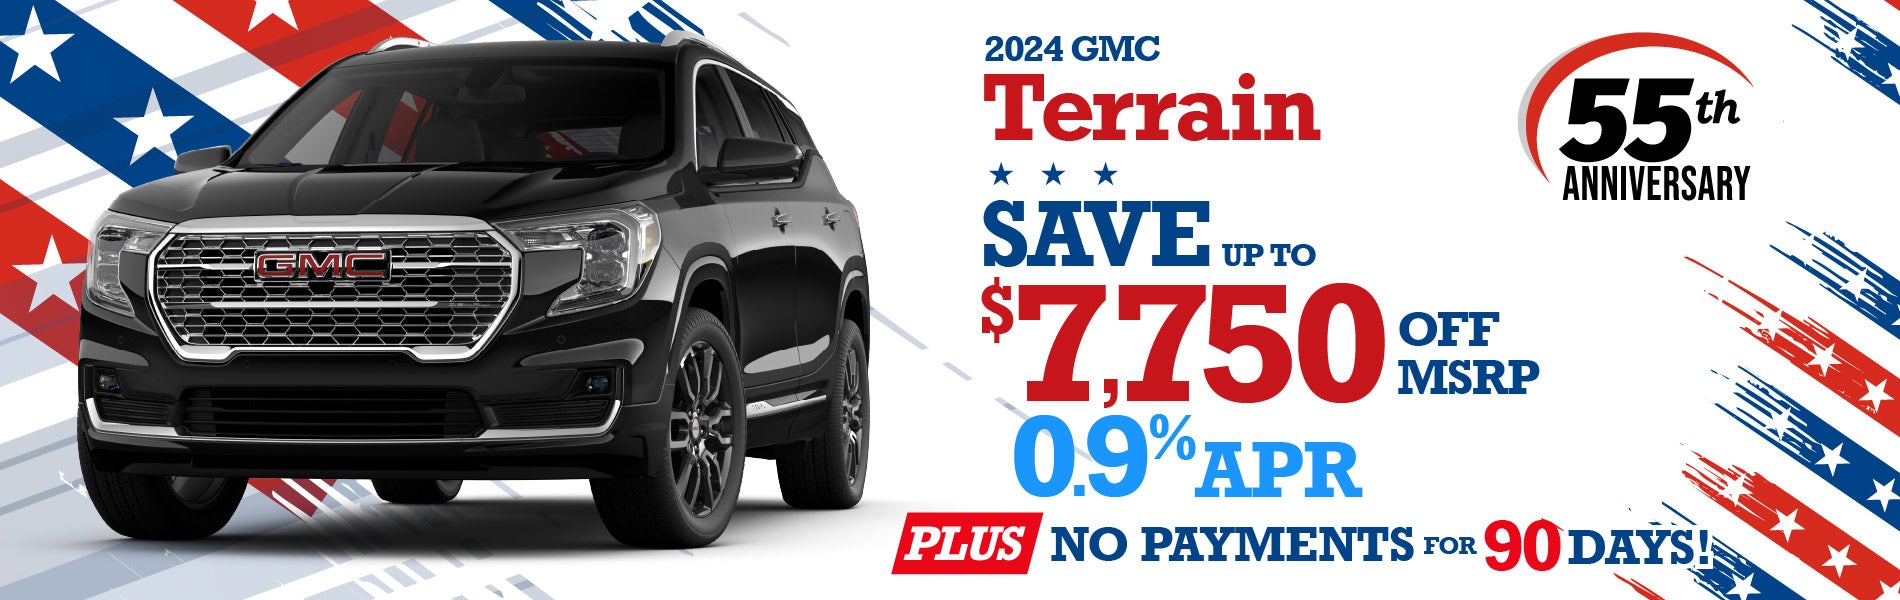 2024 GMC Terrain - SAVE up to $7750 or 0.9% APR